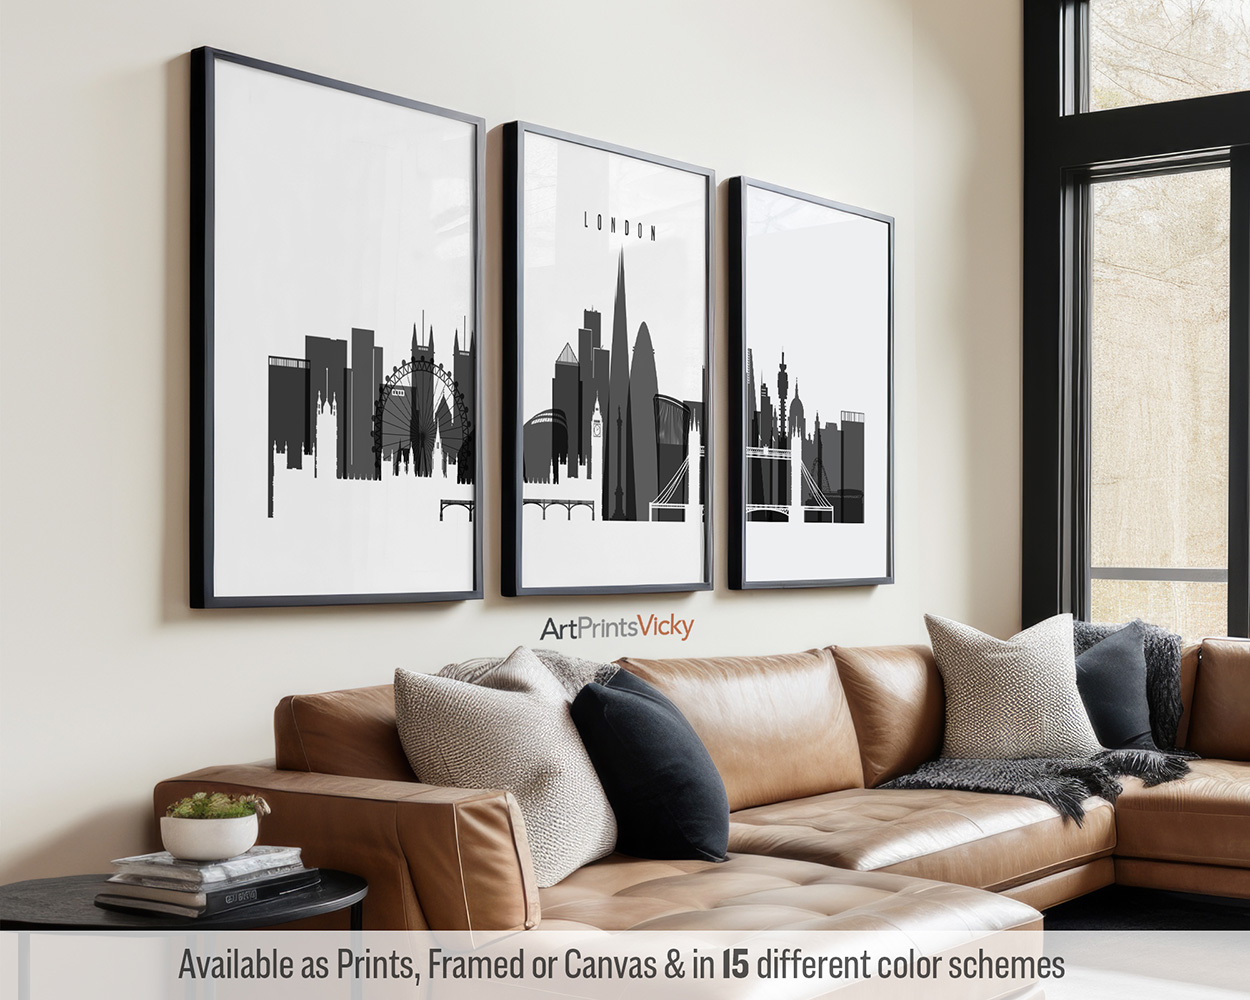 in London Transform Set & of Walls White a Prints Cityscape Your with Black Stunning